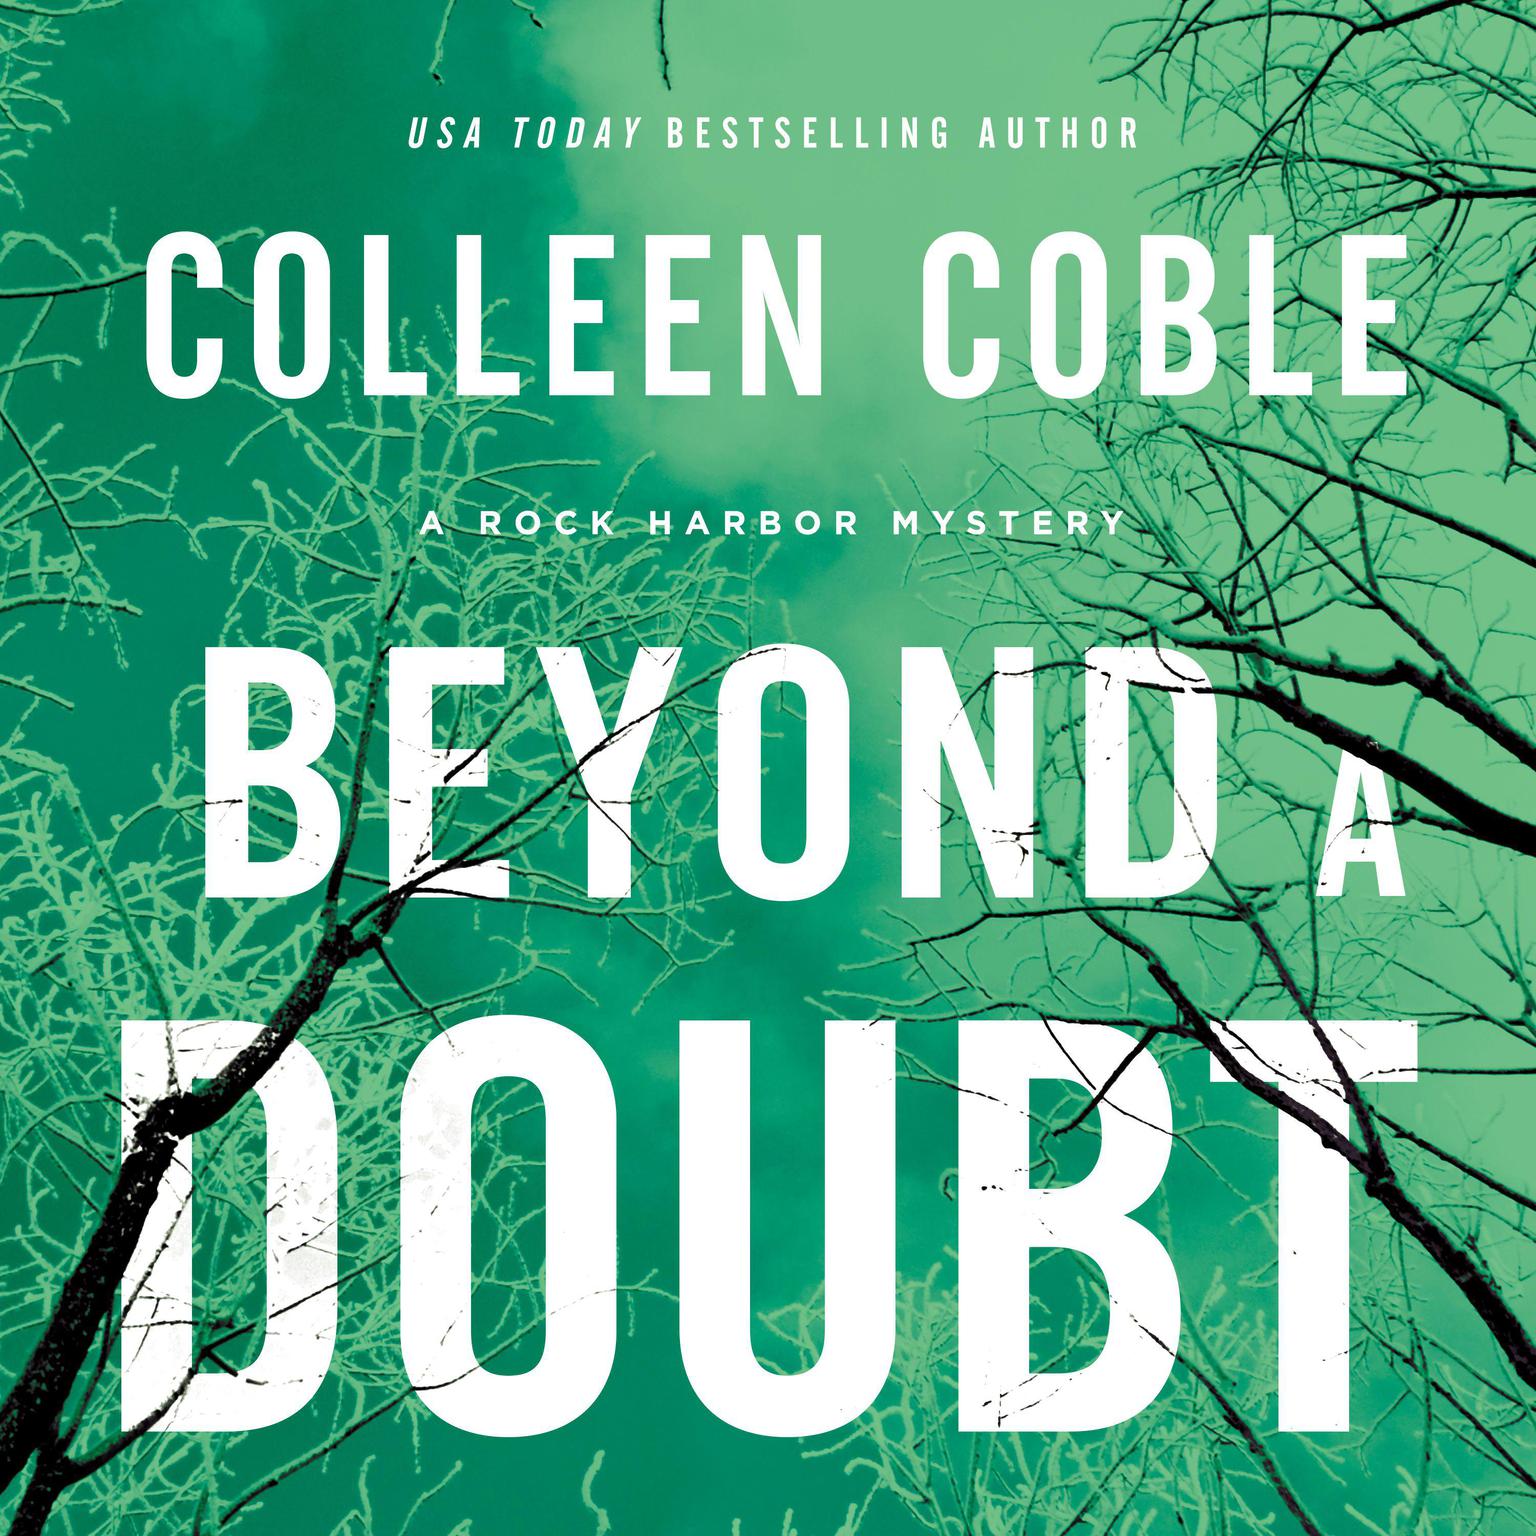 Beyond a Doubt Audiobook, by Colleen Coble